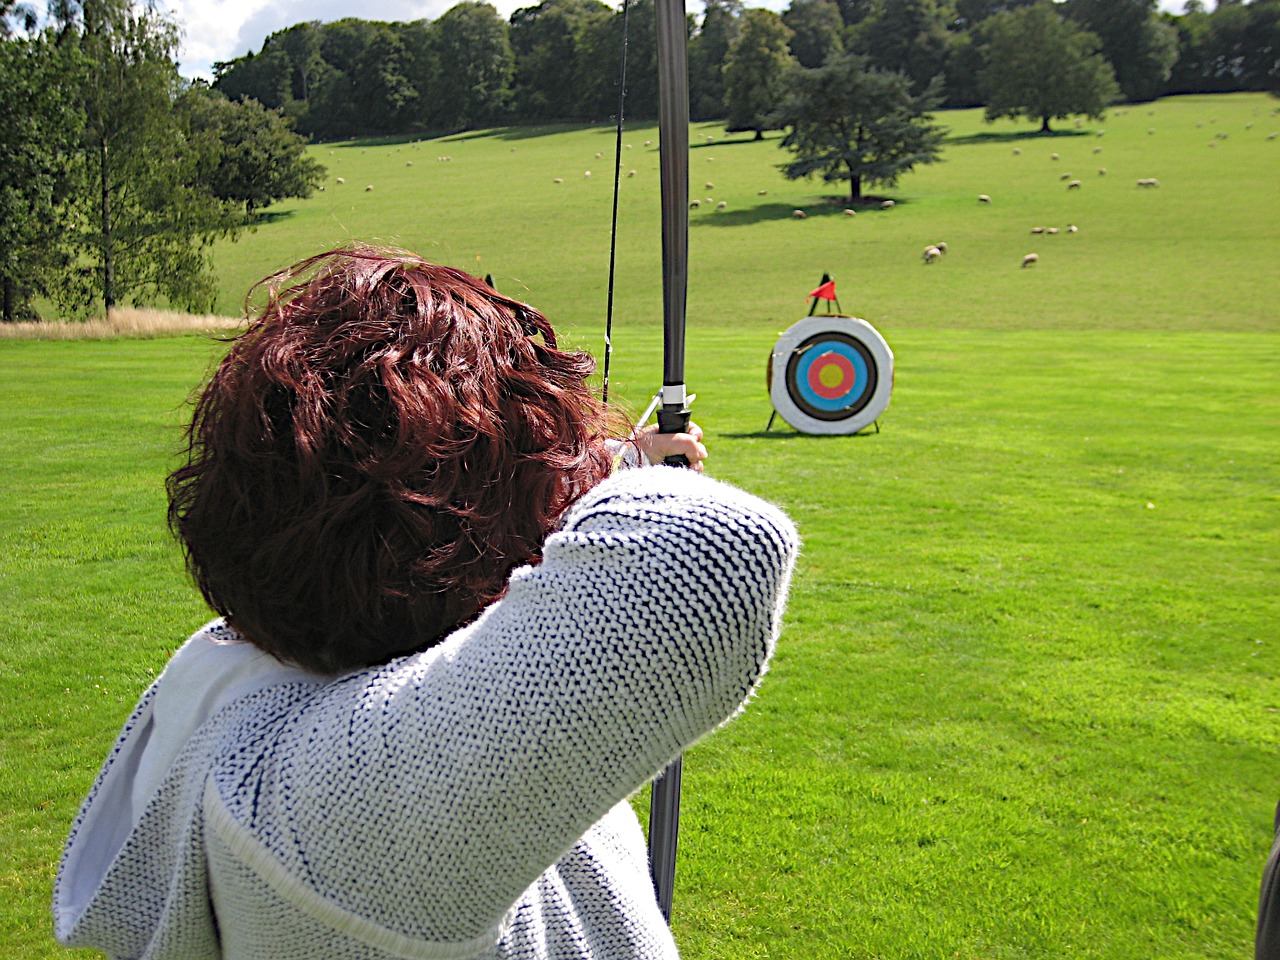 bows and arrows archery national trust free photo